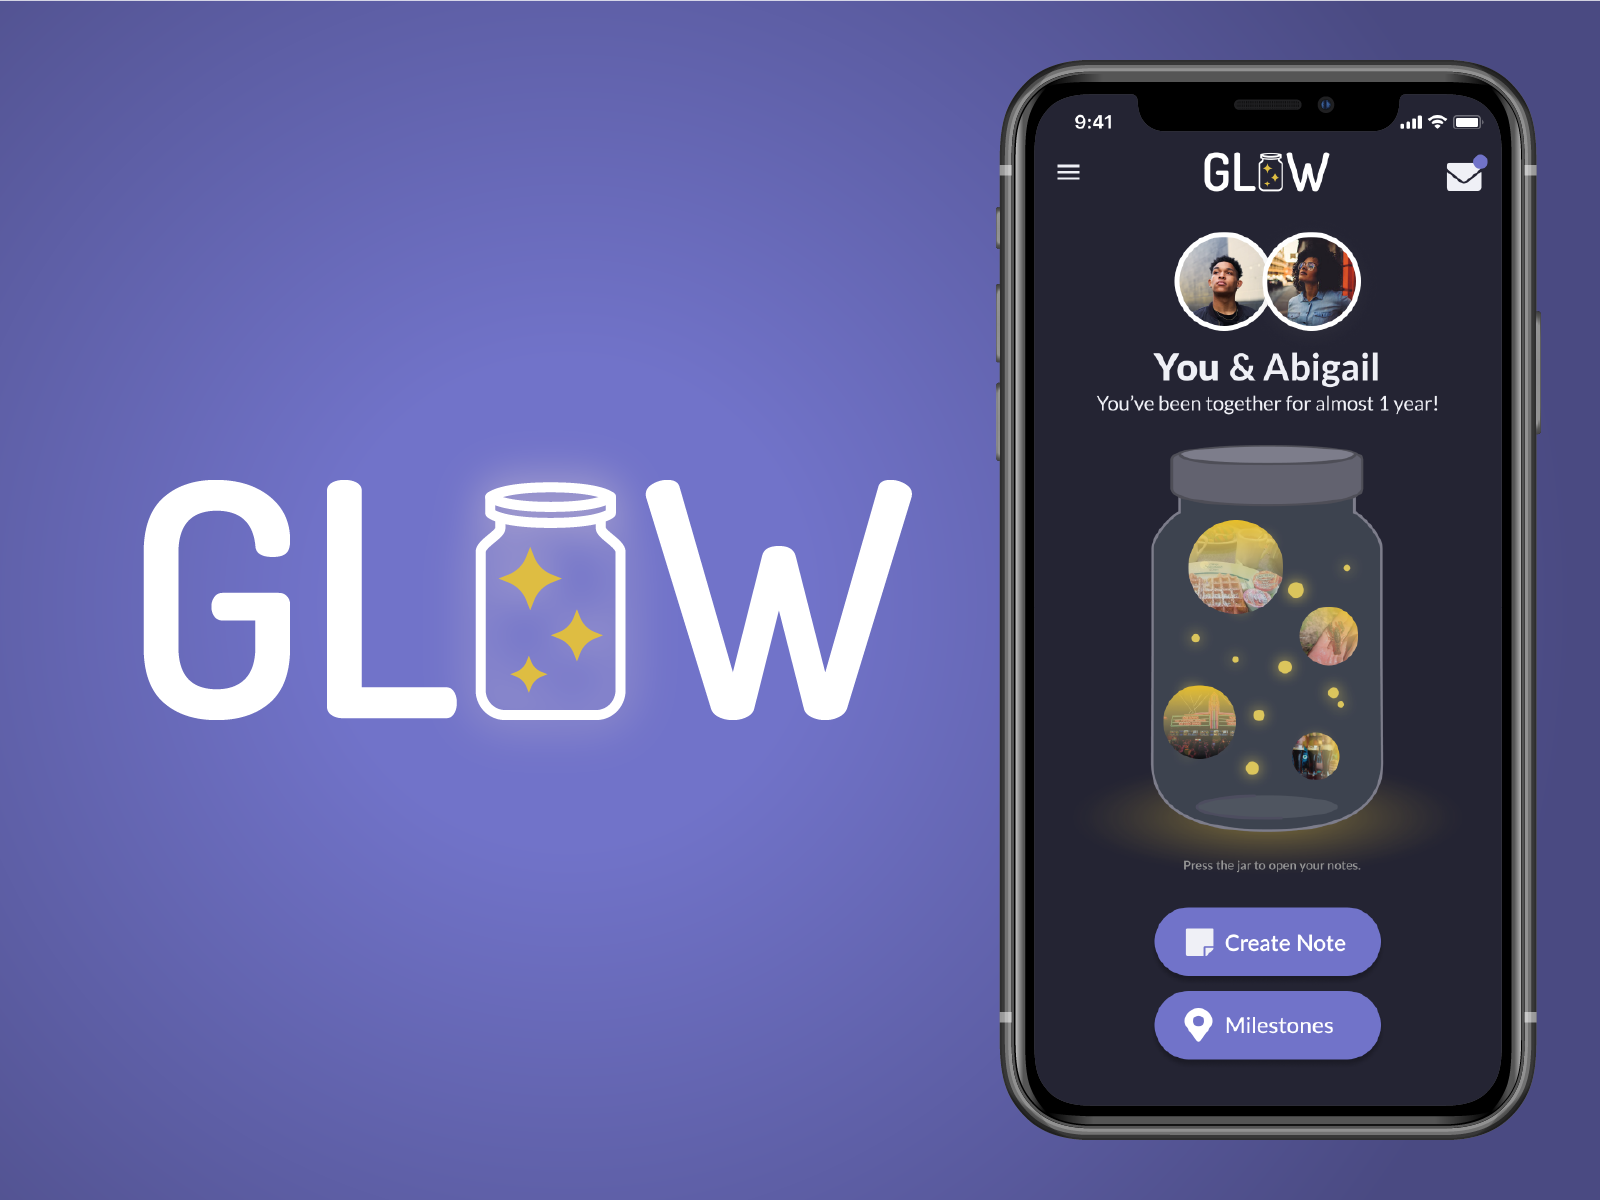 Preview of Glow project interface